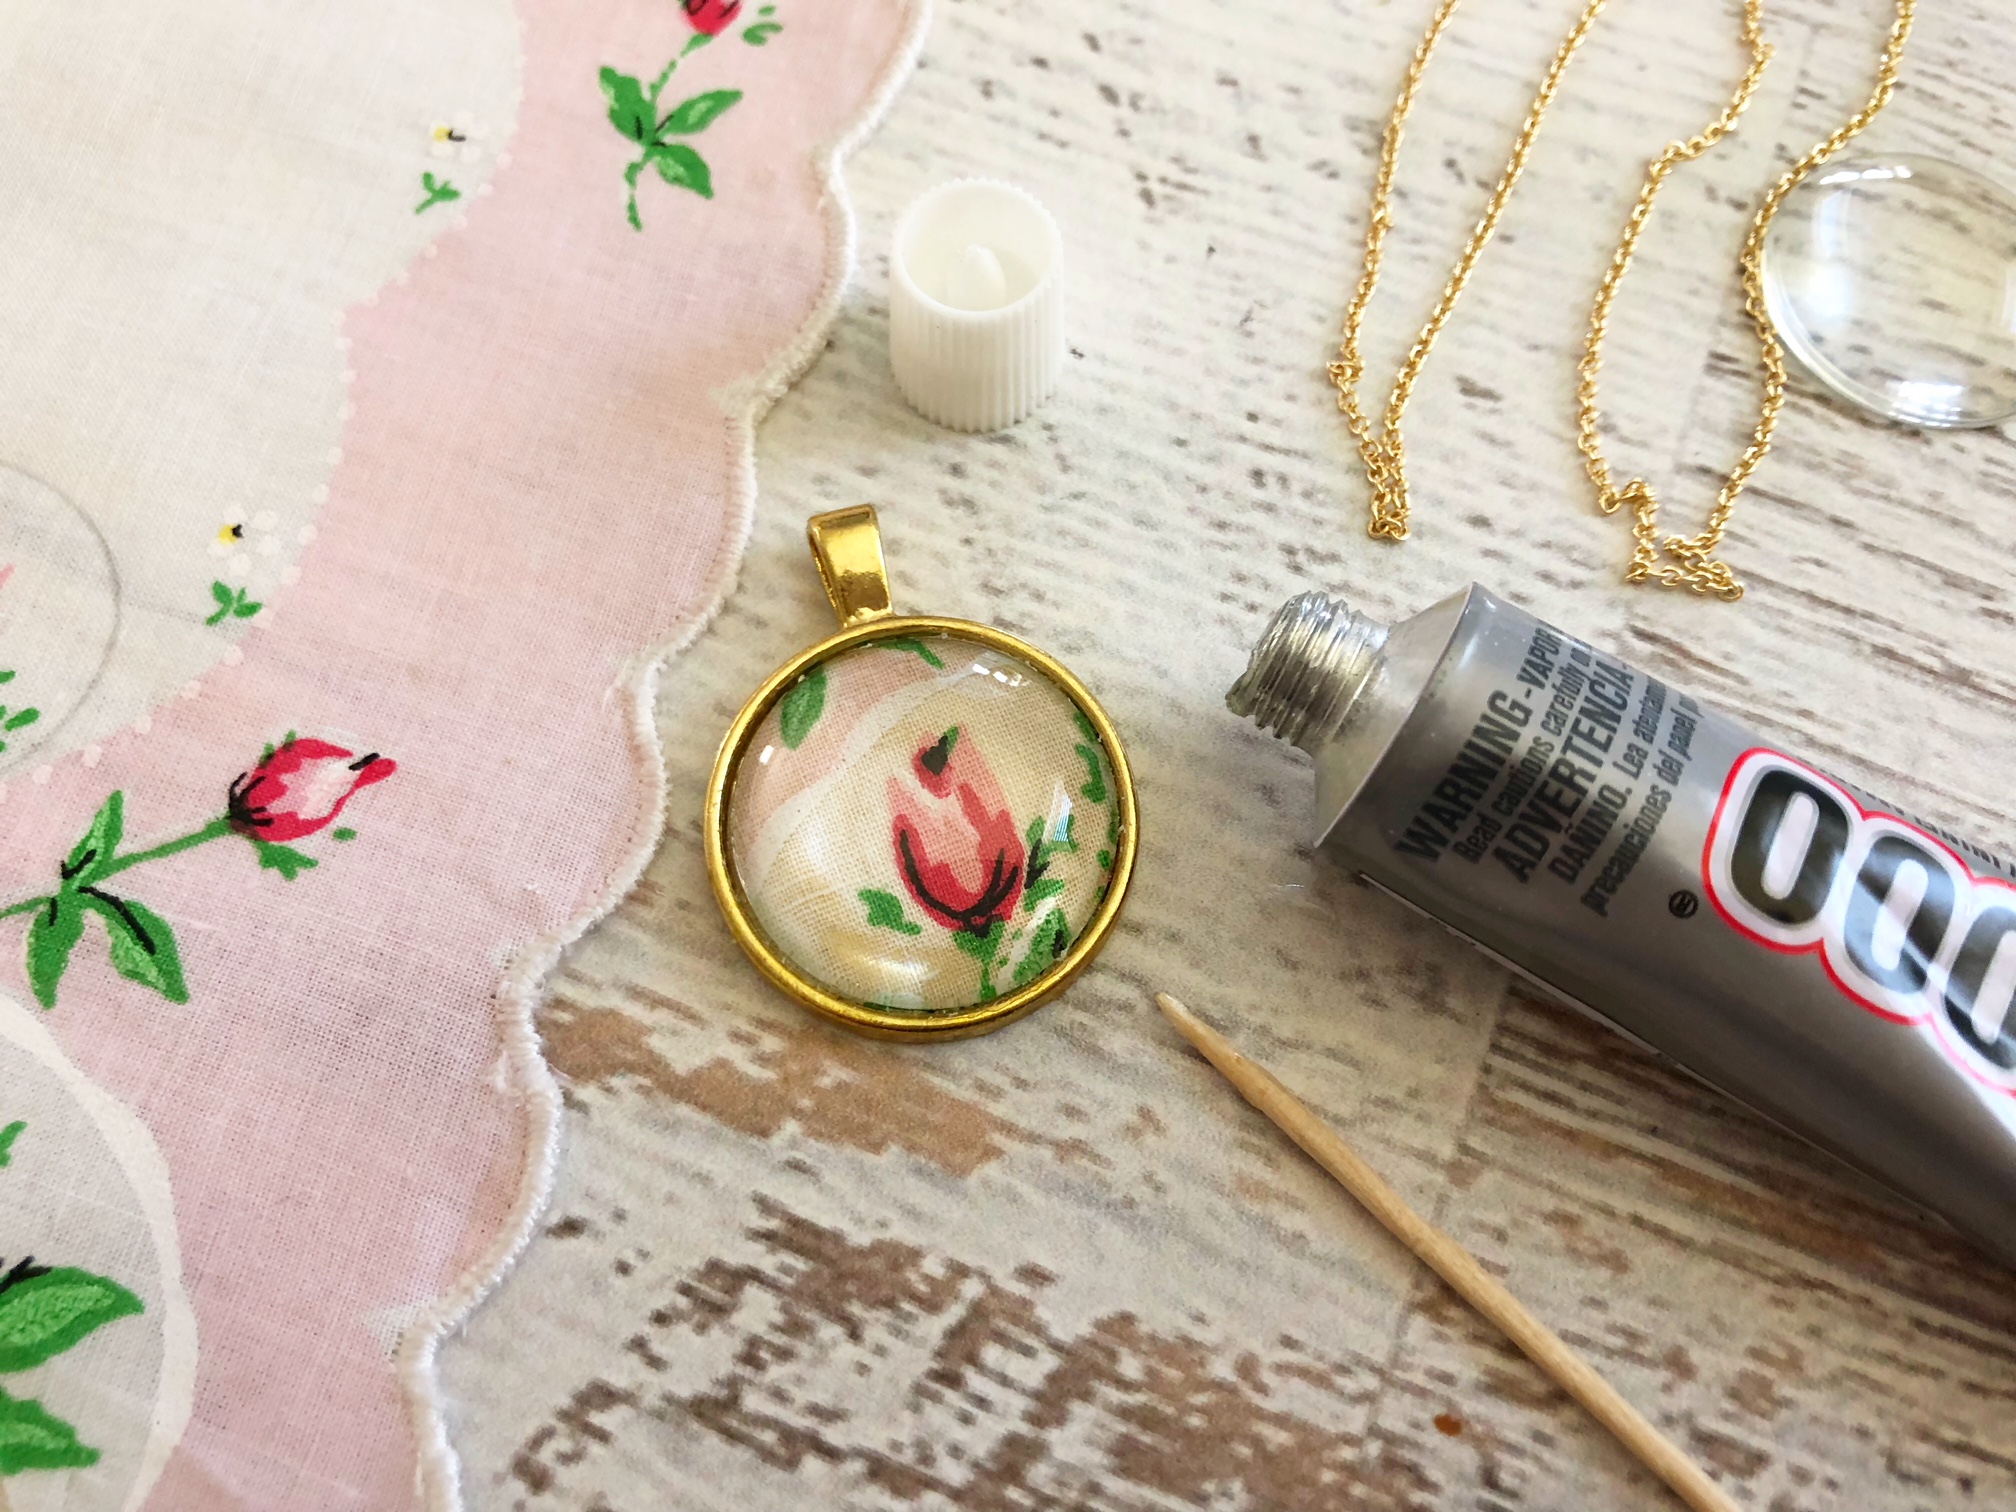  Our Handkerchief Pendant Necklace is a beautiful way to upcycle your favorite handkerchief.